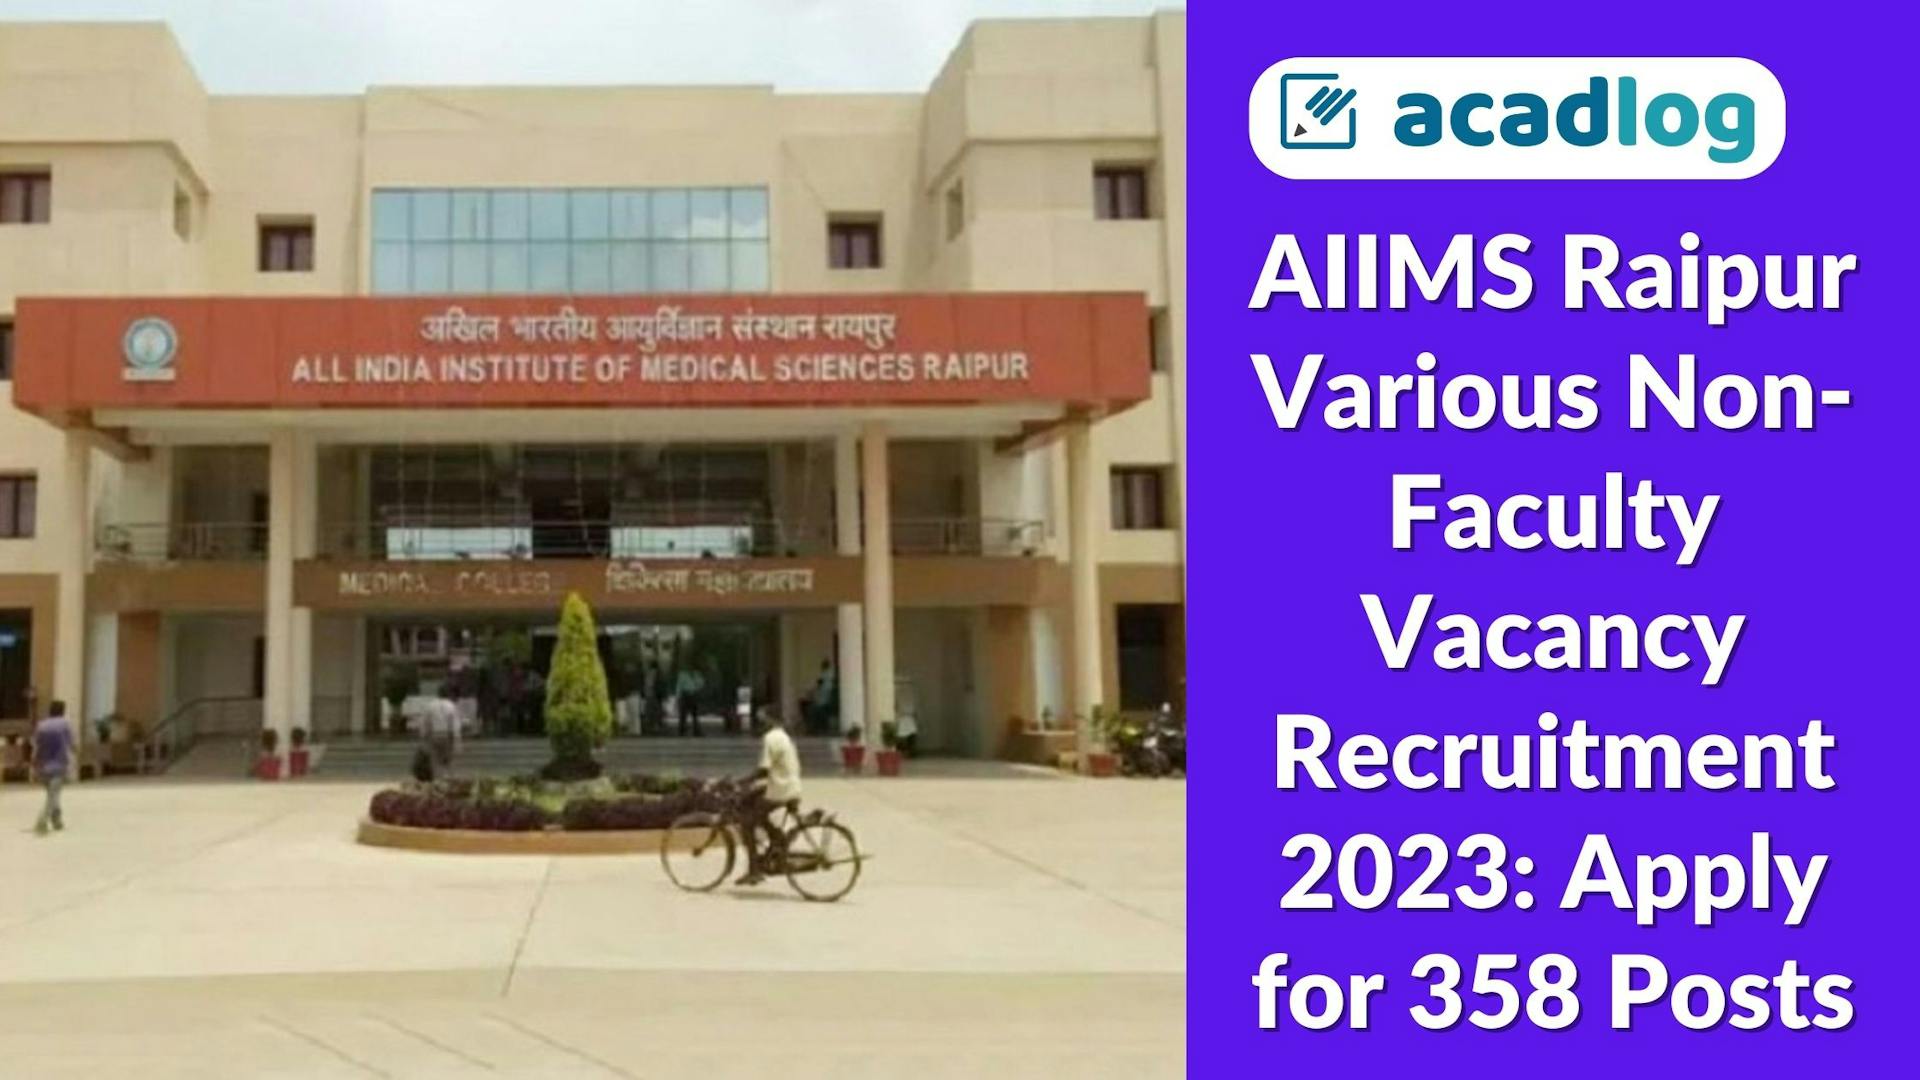 AIIMS Raipur Various Non-Faculty Vacancy Recruitment 2023: Apply for 358 Posts